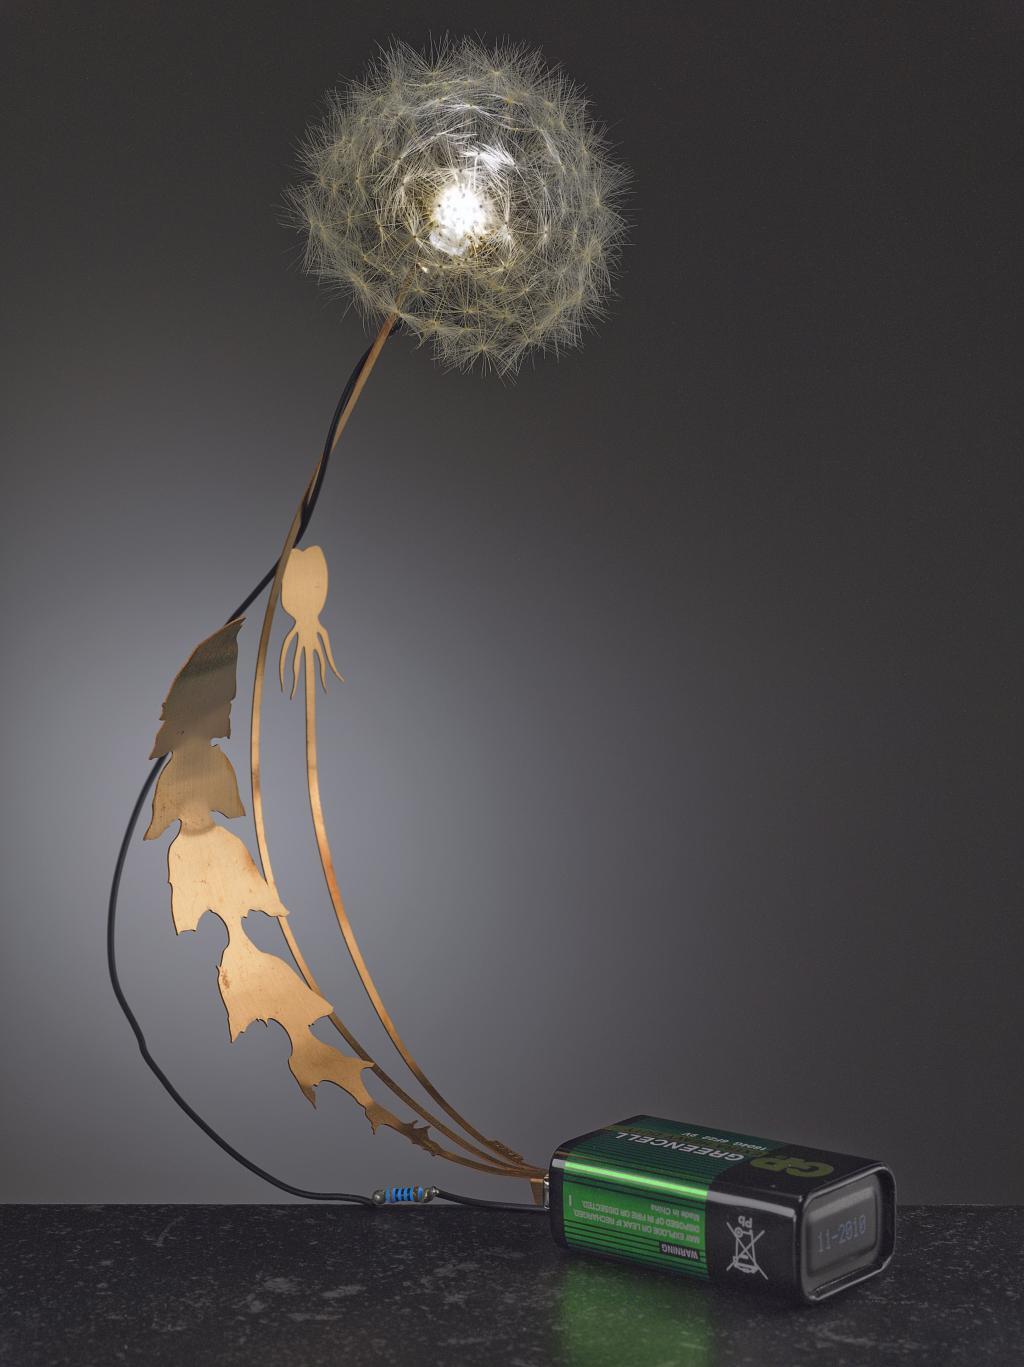 Studio Drift: Dandelight

Materials: phosphor Brons, real Dandelion, and LEDDandelight is a little luminous dandelion. This little piece of real nature lightens up by batteryfood. The real dandelion seeds are one by one connected to the L.E.D.
